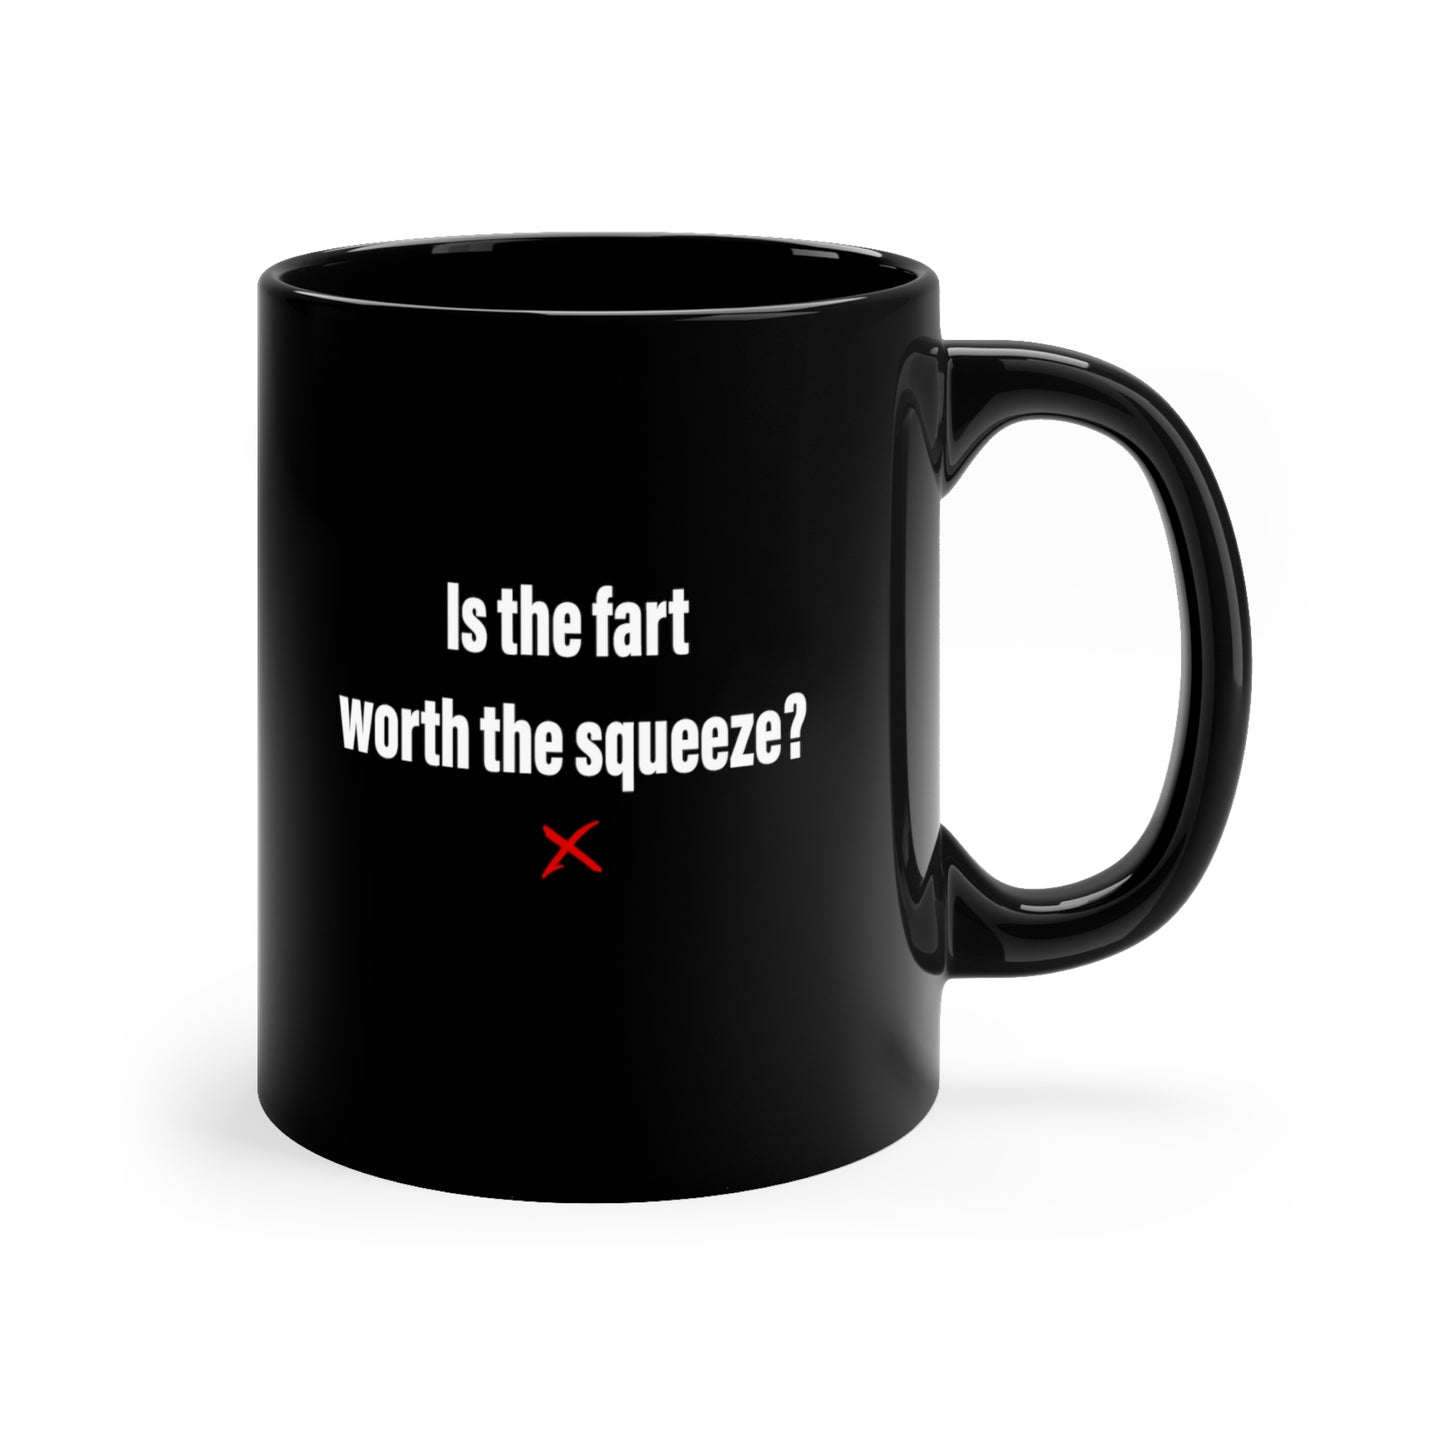 Is the fart worth the squeeze? - Mug